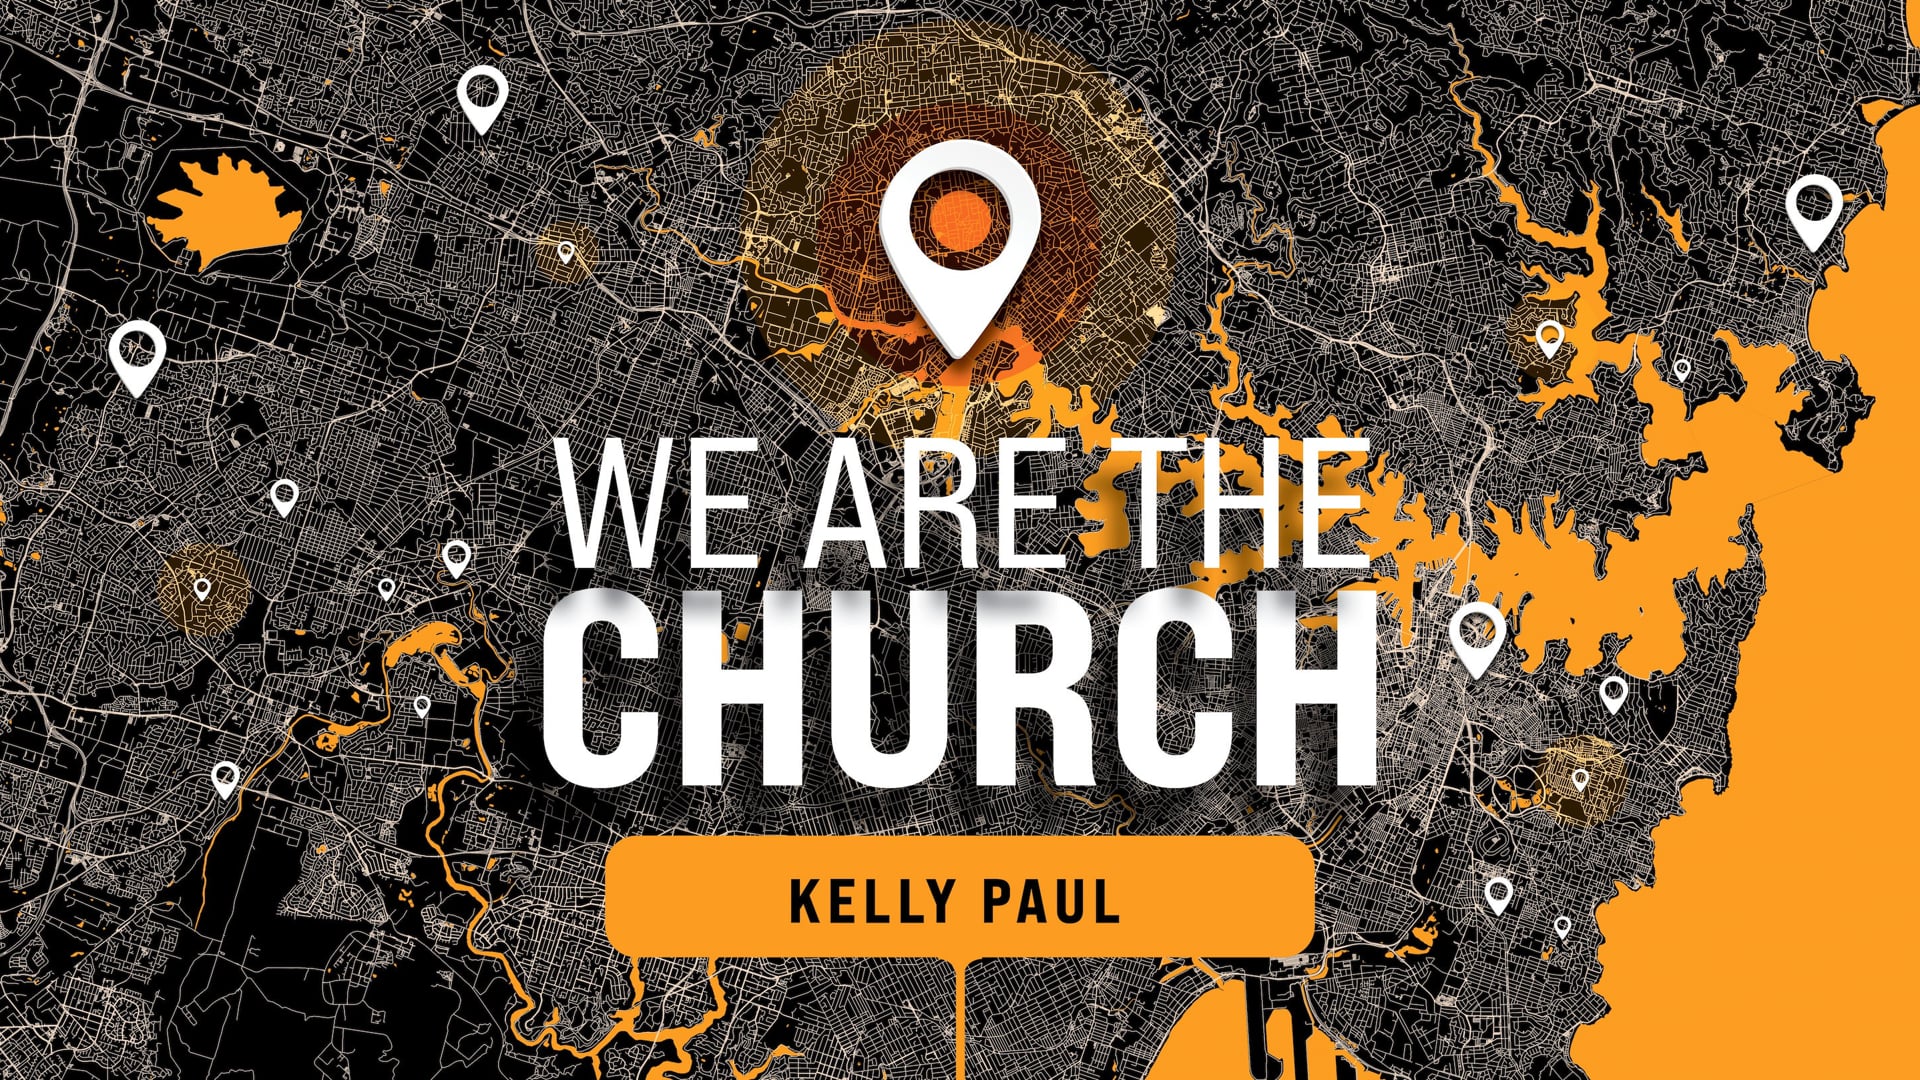 We Are The Church, Pt. 3 // "What's New?" (Kelly Paul)